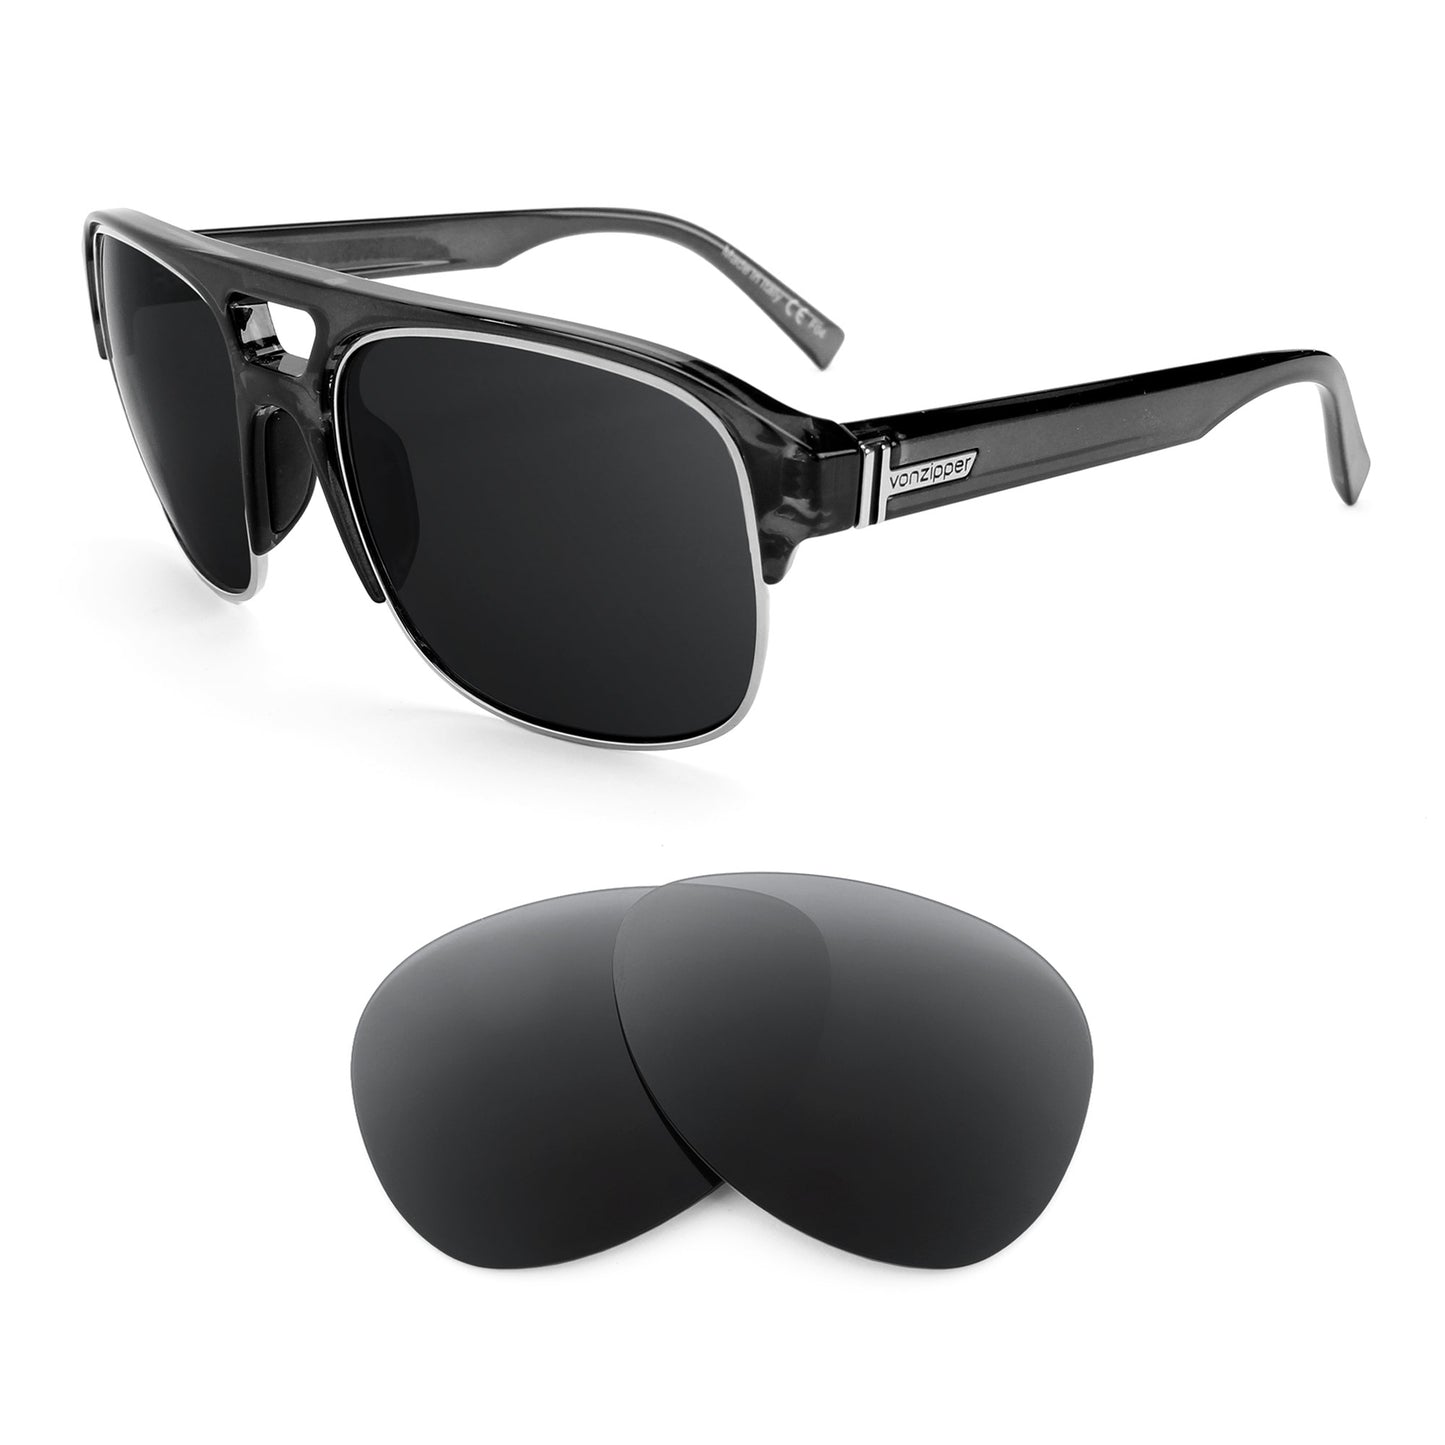 VonZipper Supernacht sunglasses with replacement lenses